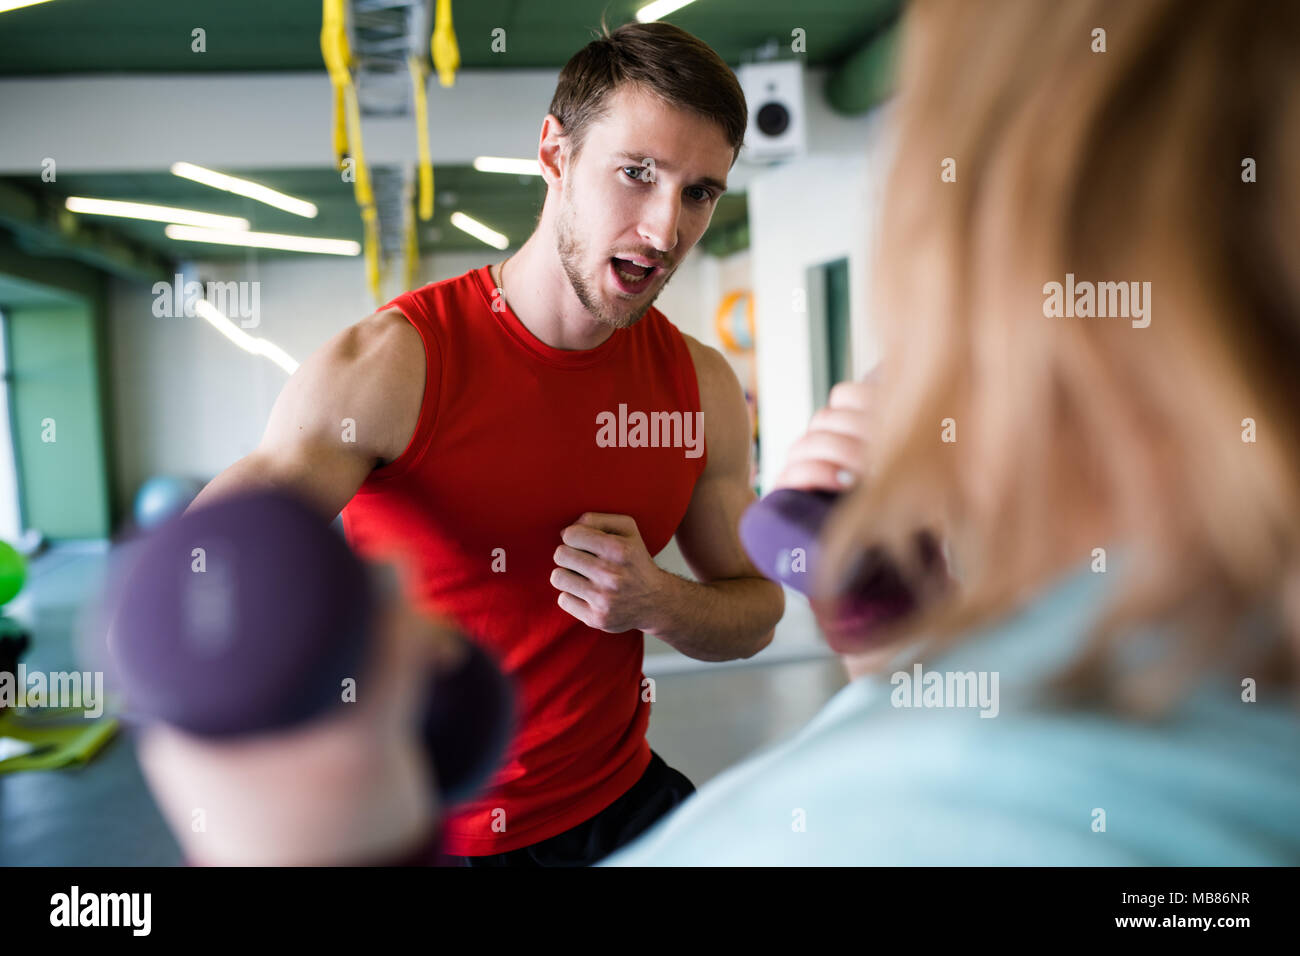 Personal Coach Motivating Client Stock Photo